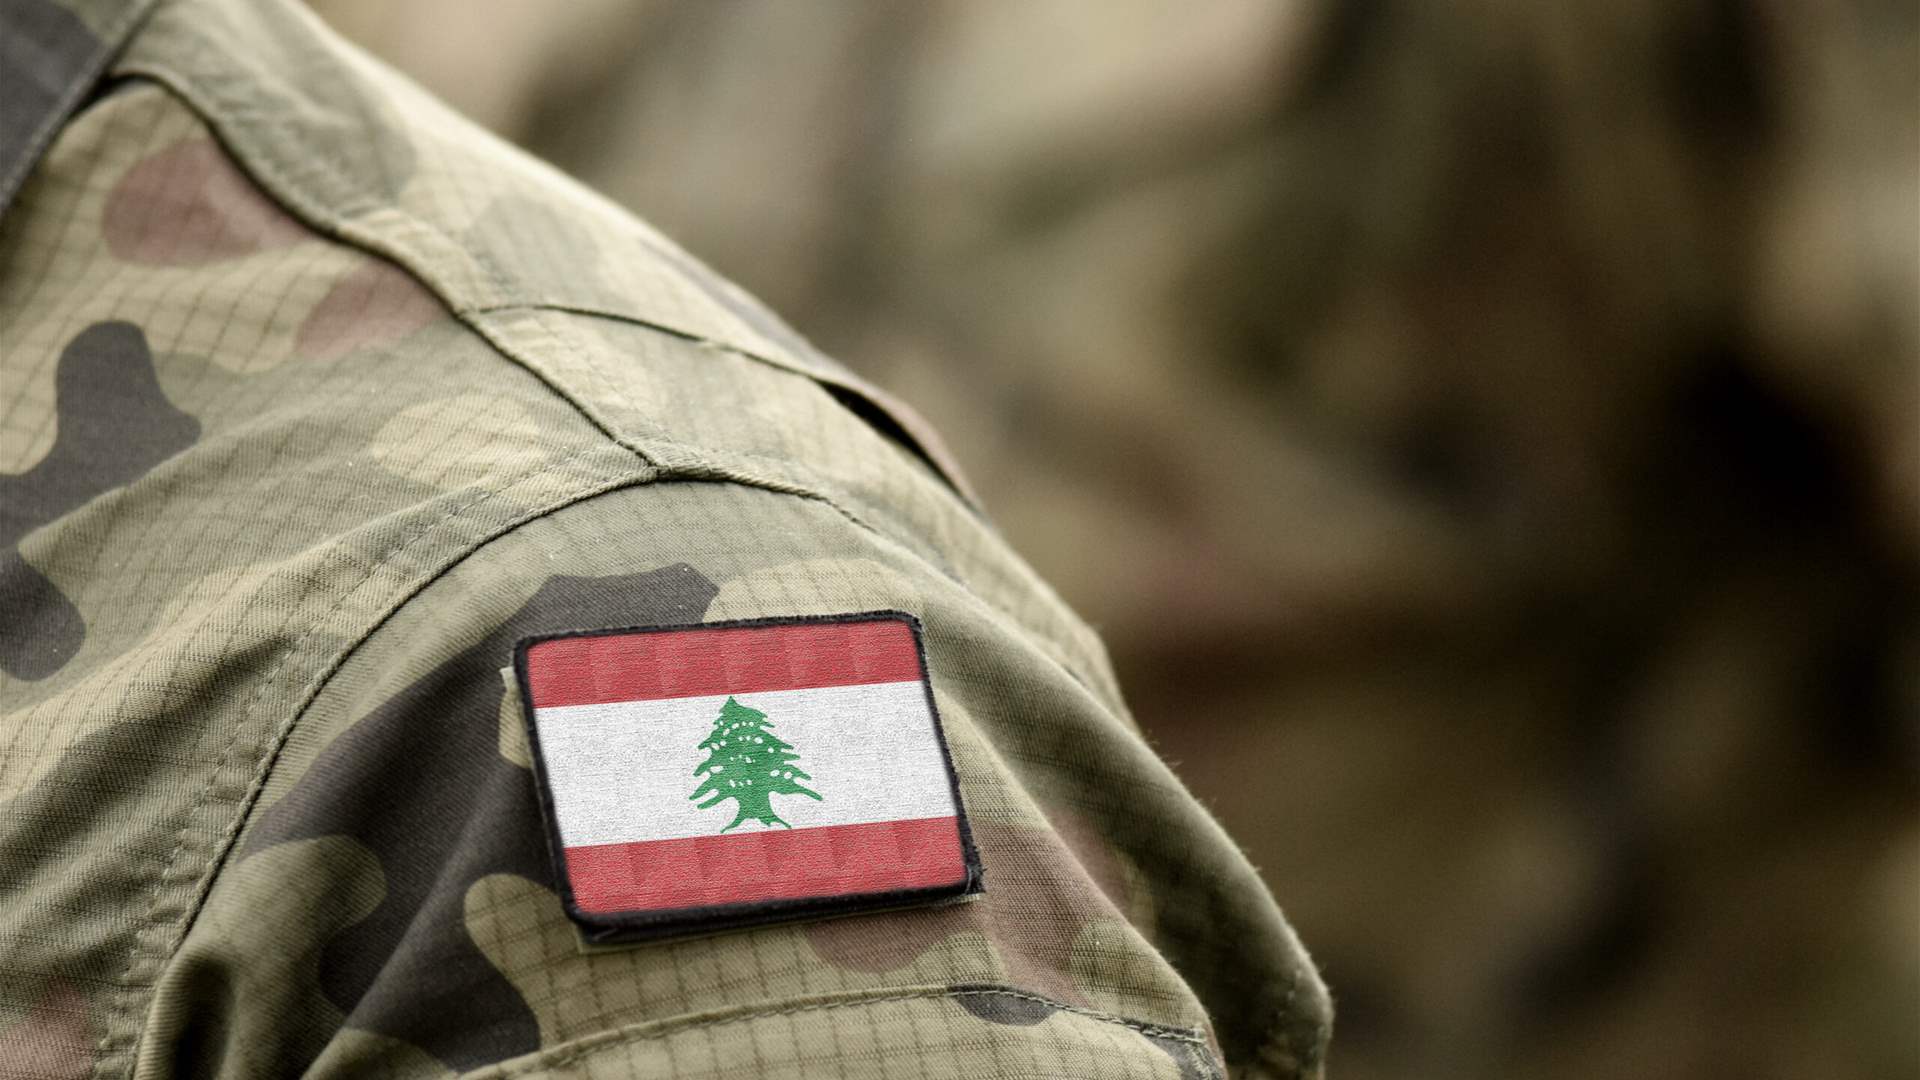 Lebanese authorities detain suspects linked to the Saudi national kidnapping